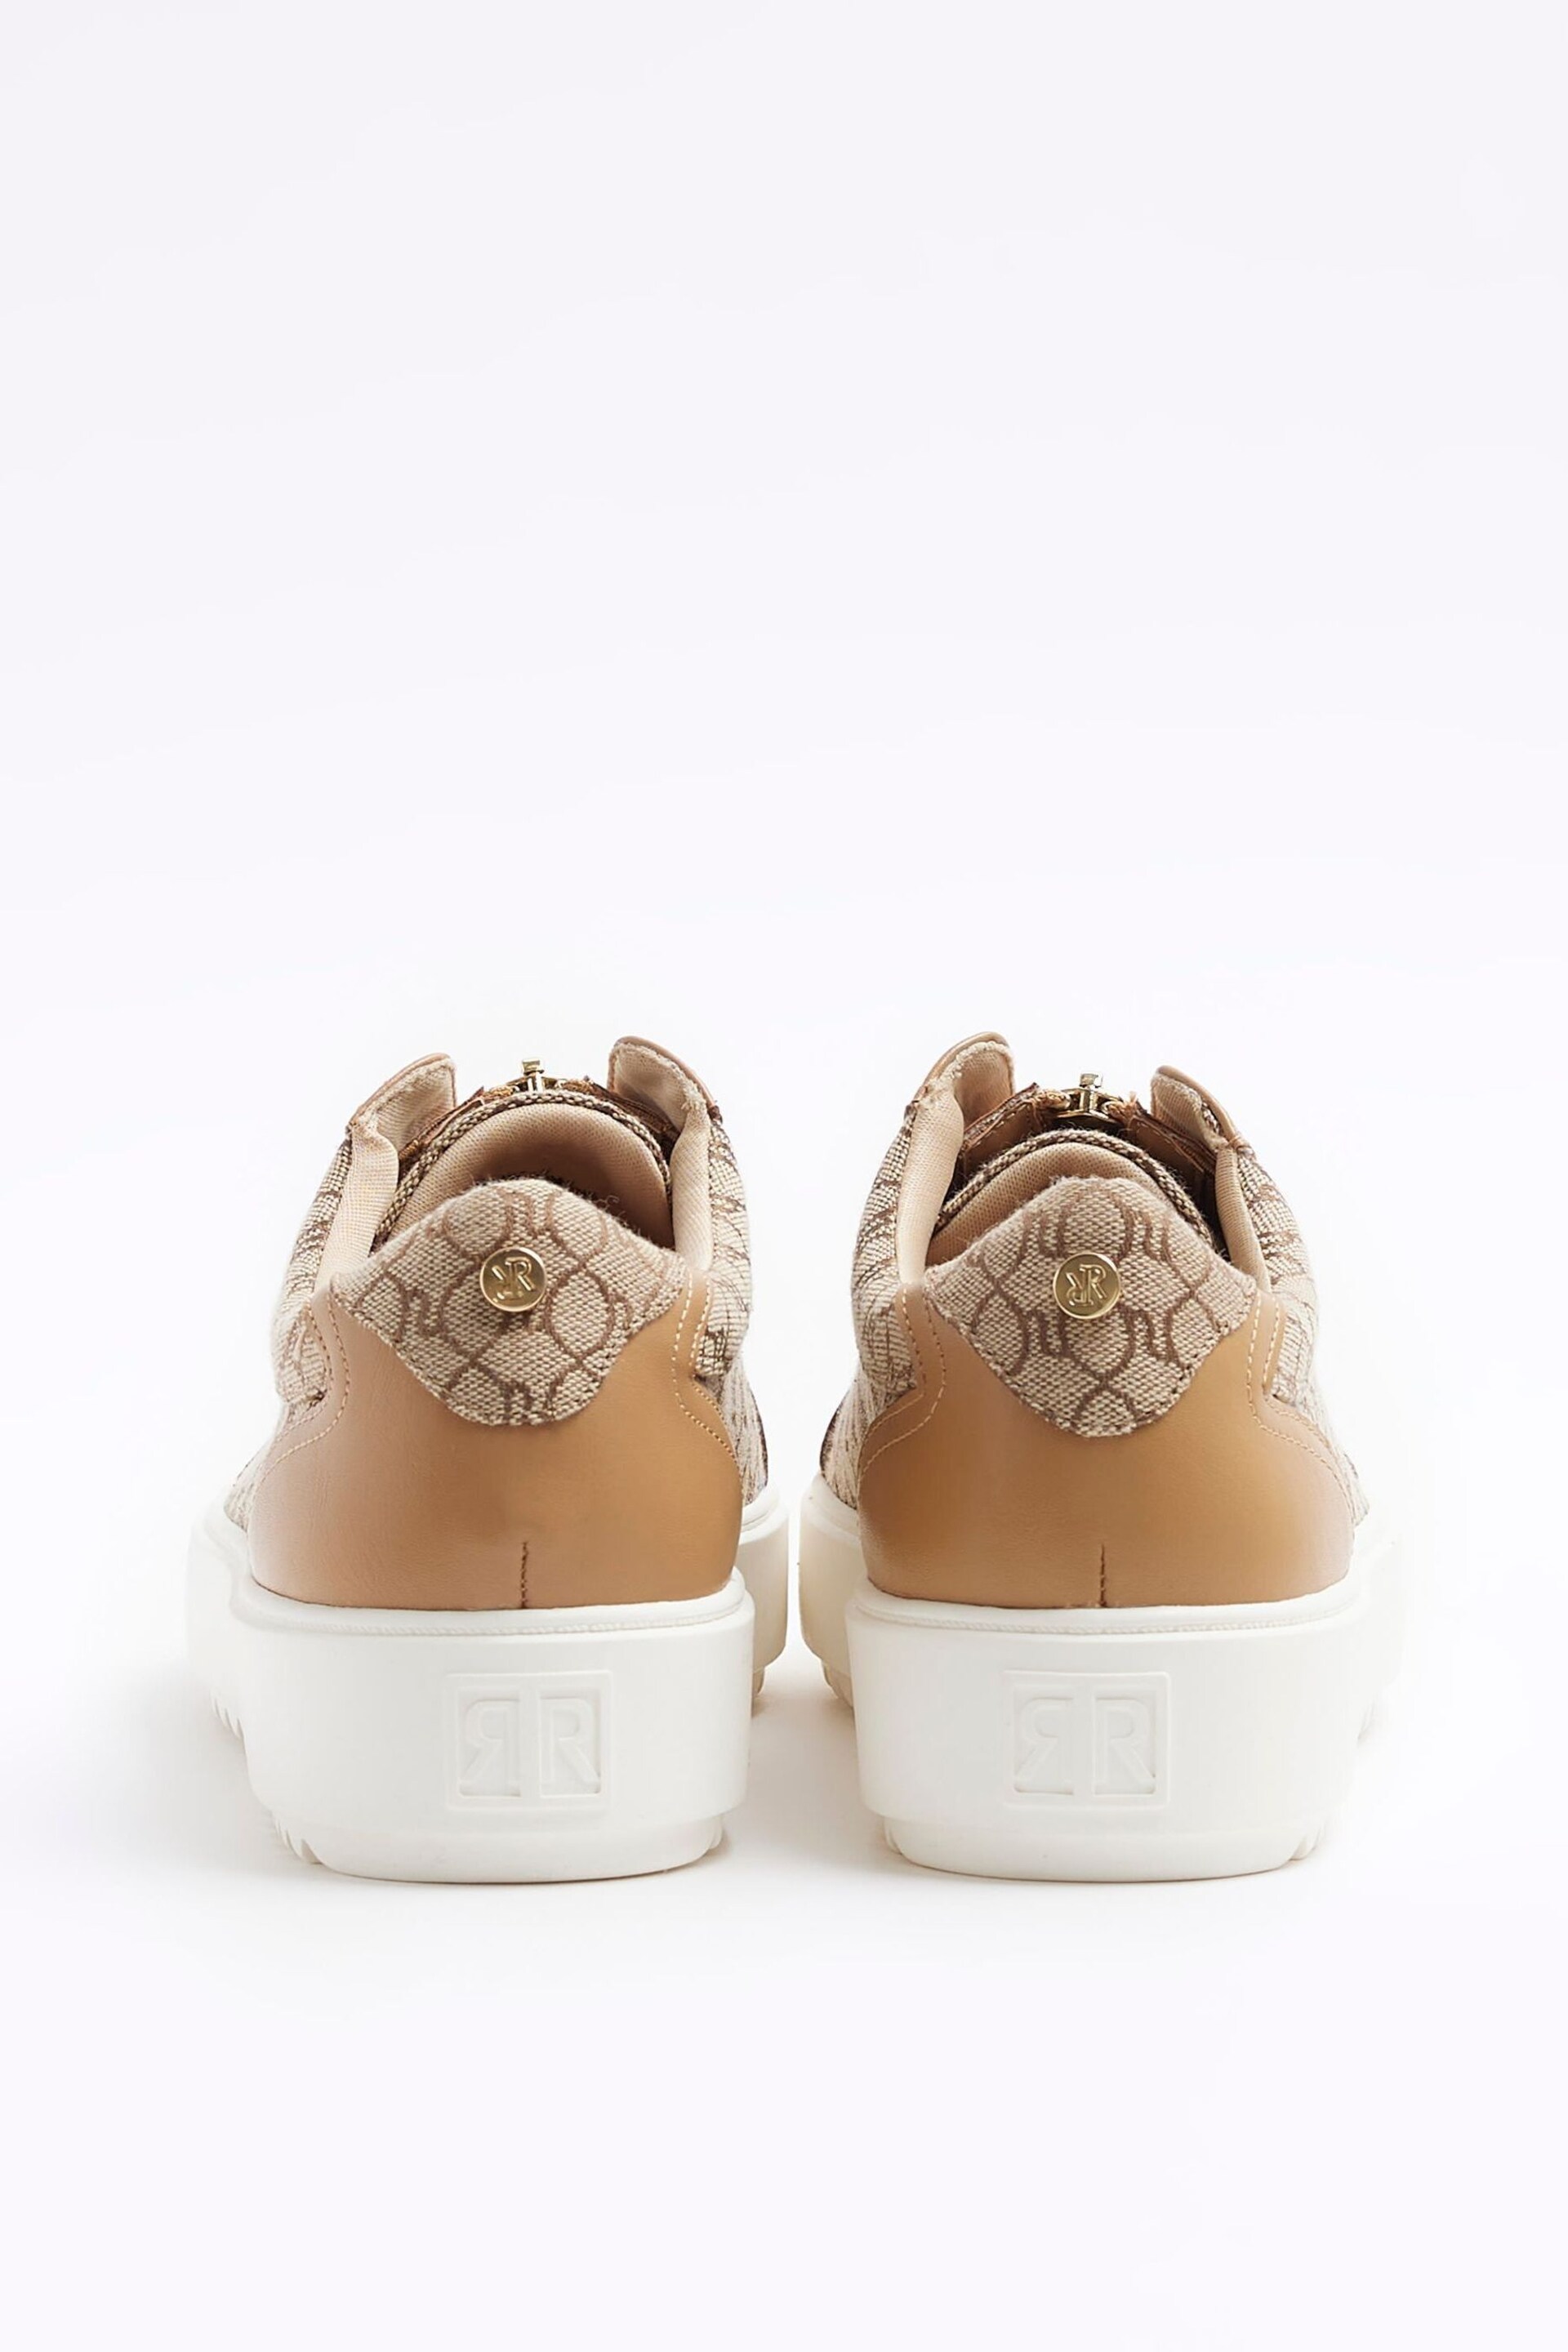 River Island Brown Slip-Ons Plimsole Trainers - Image 3 of 4